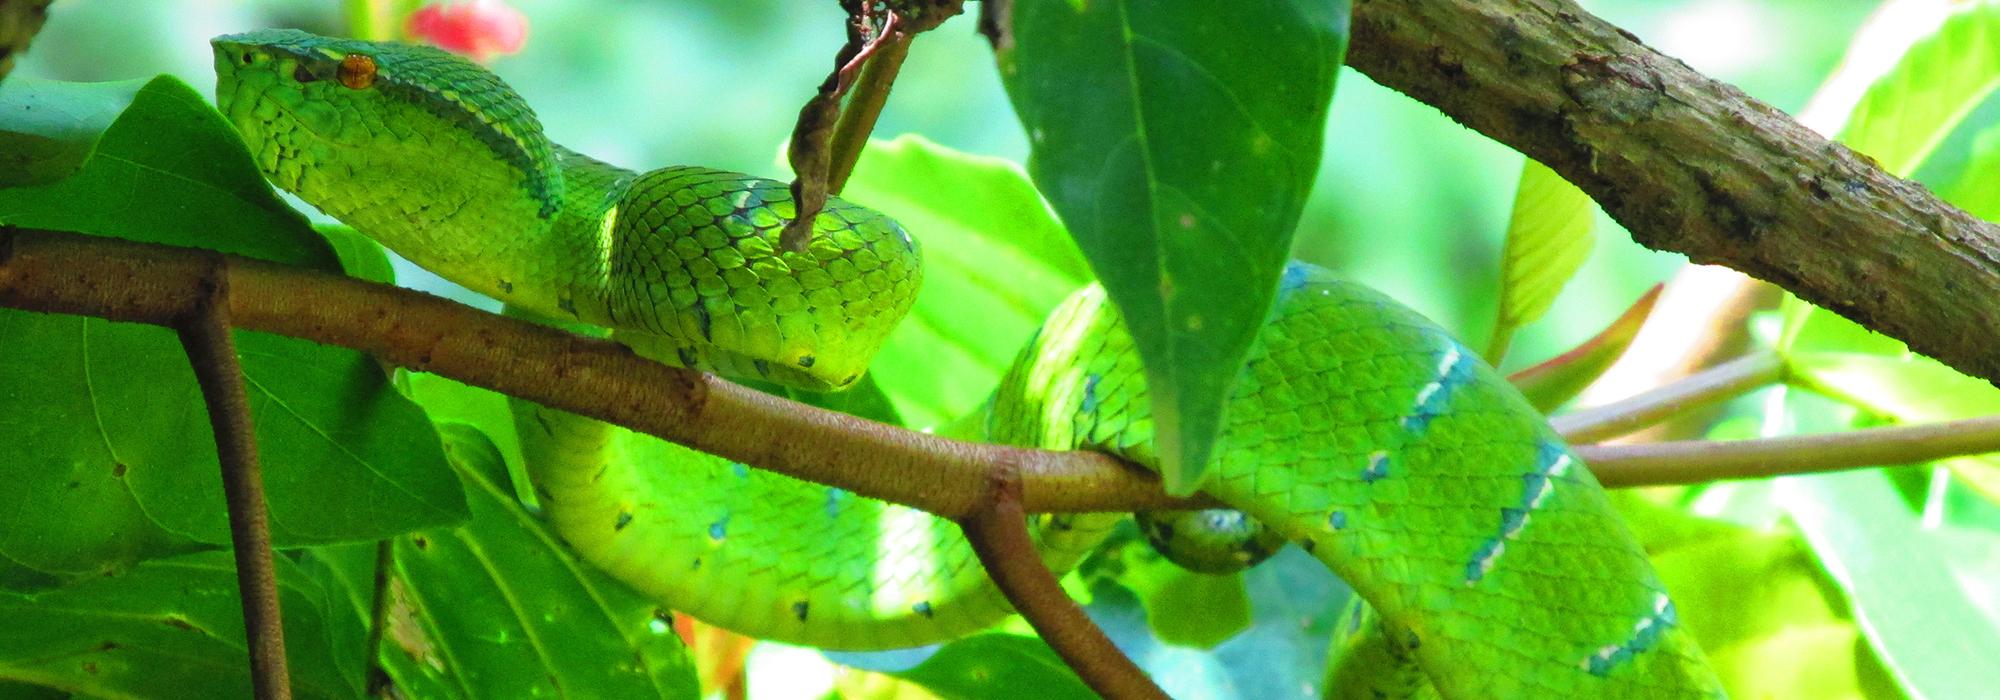 A deadly pit viper sitting motionless in a tree - Photo: © Henry Grub